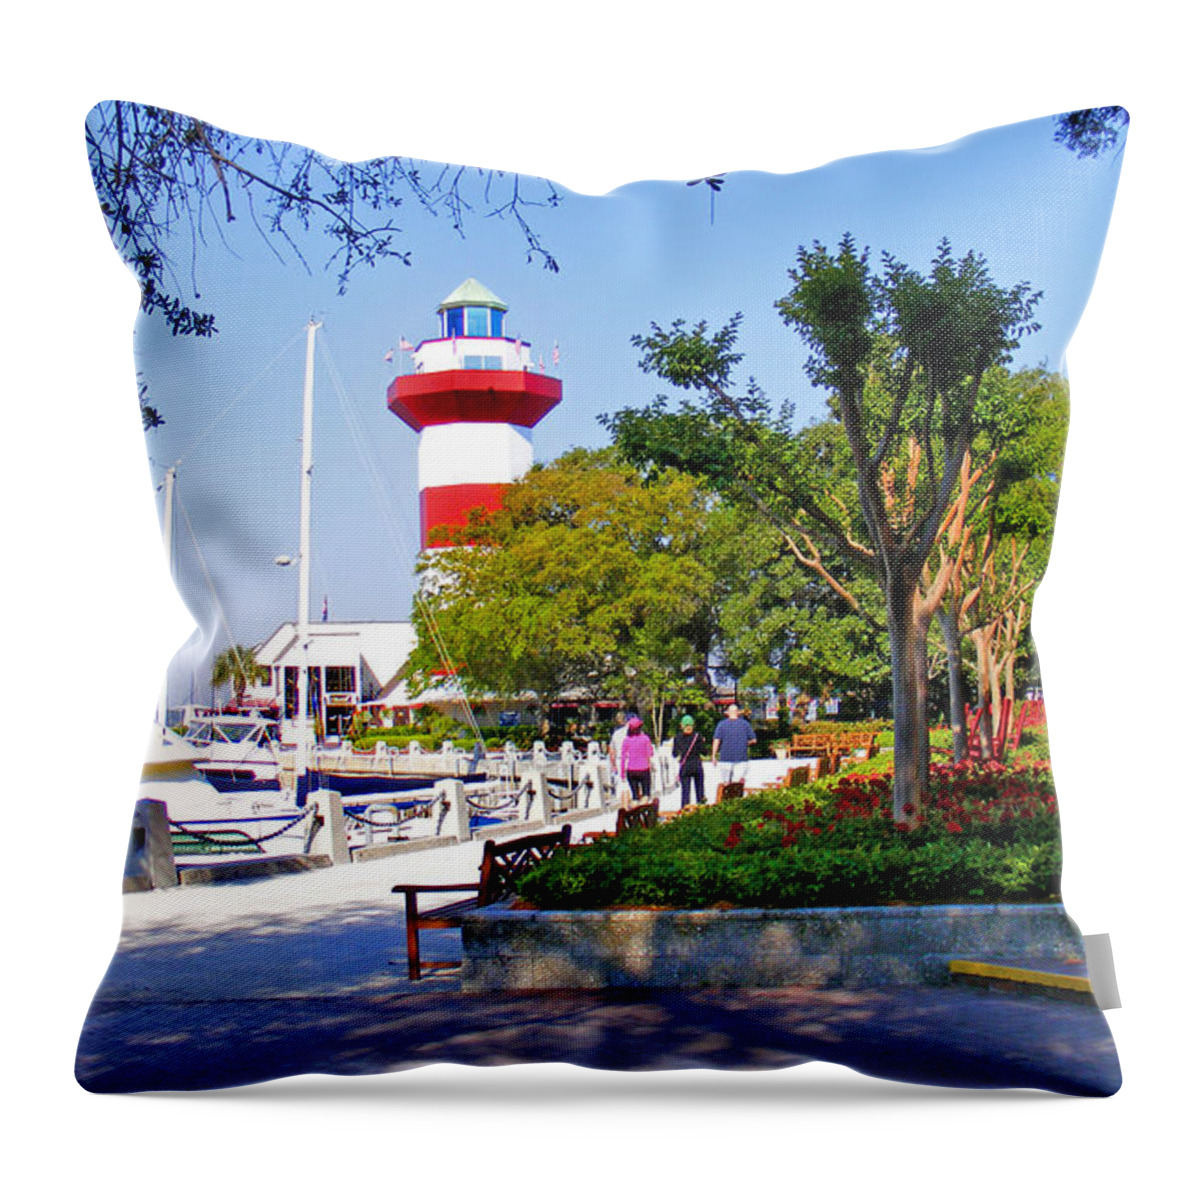 Lighthouse Throw Pillow featuring the photograph Hilton Head Lighthouse by Duane McCullough